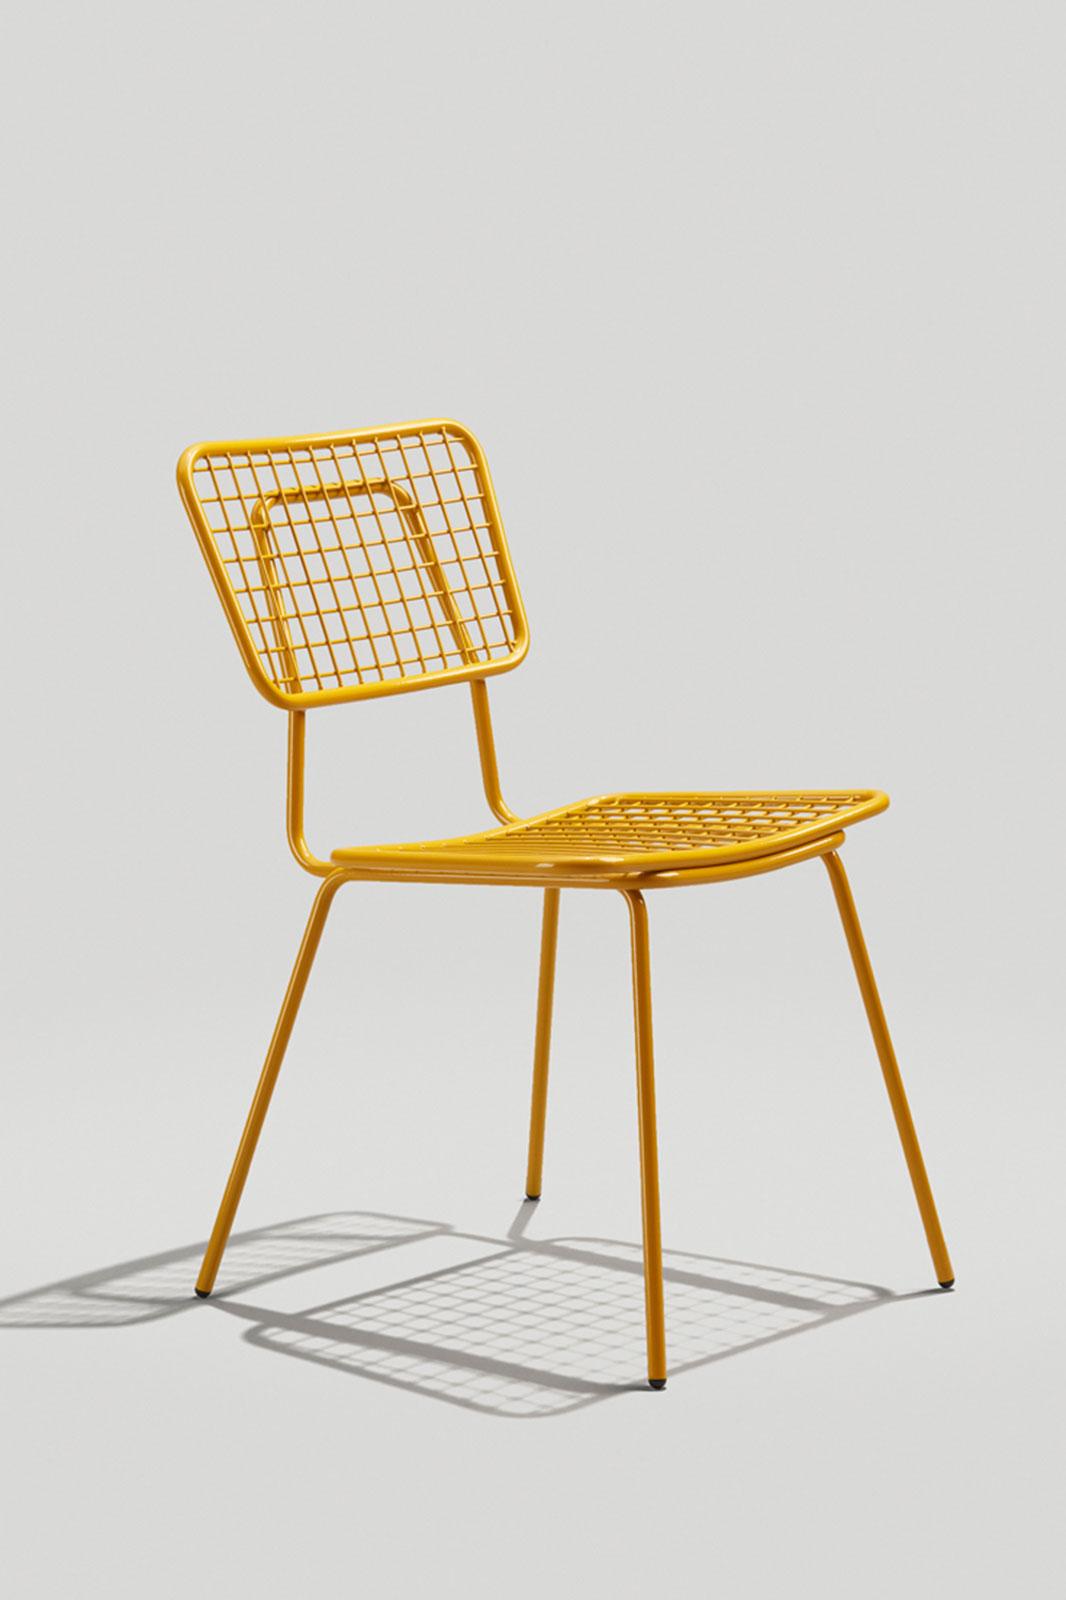 Opla Outdoor Chair